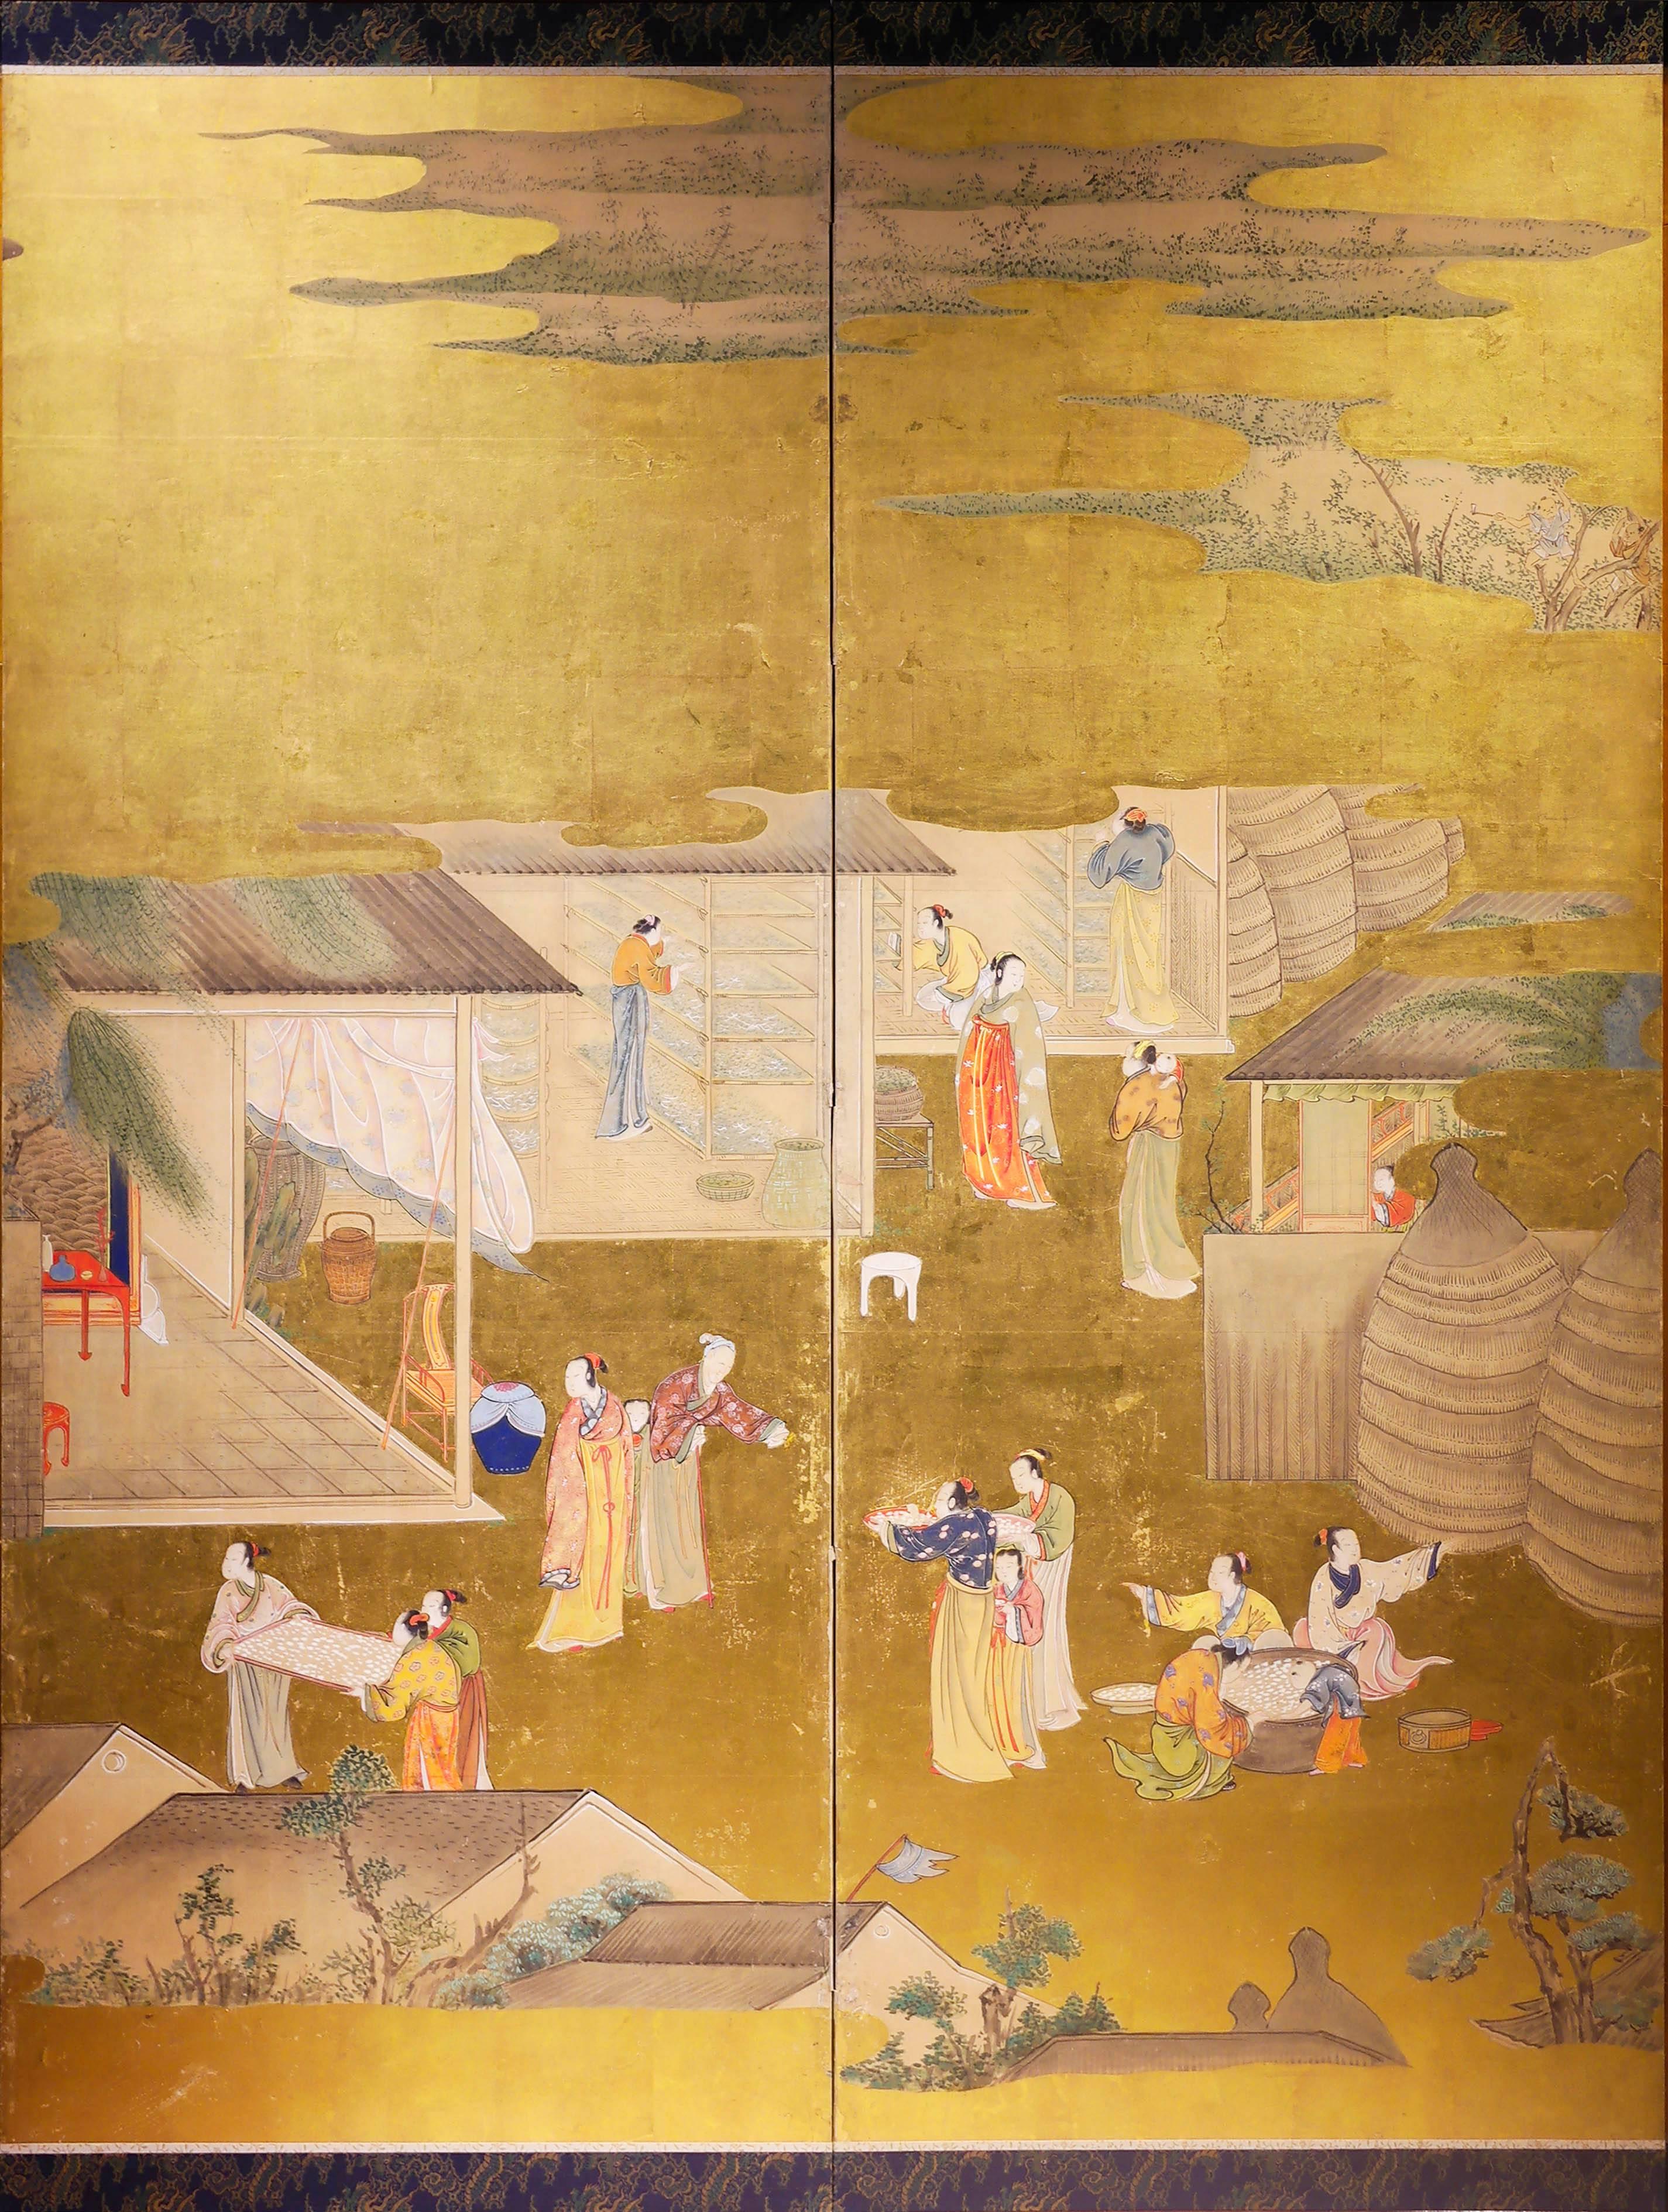 Painted Late 18th Century, Japanese Folding Screen, Picture of Sericulture, Edo Period